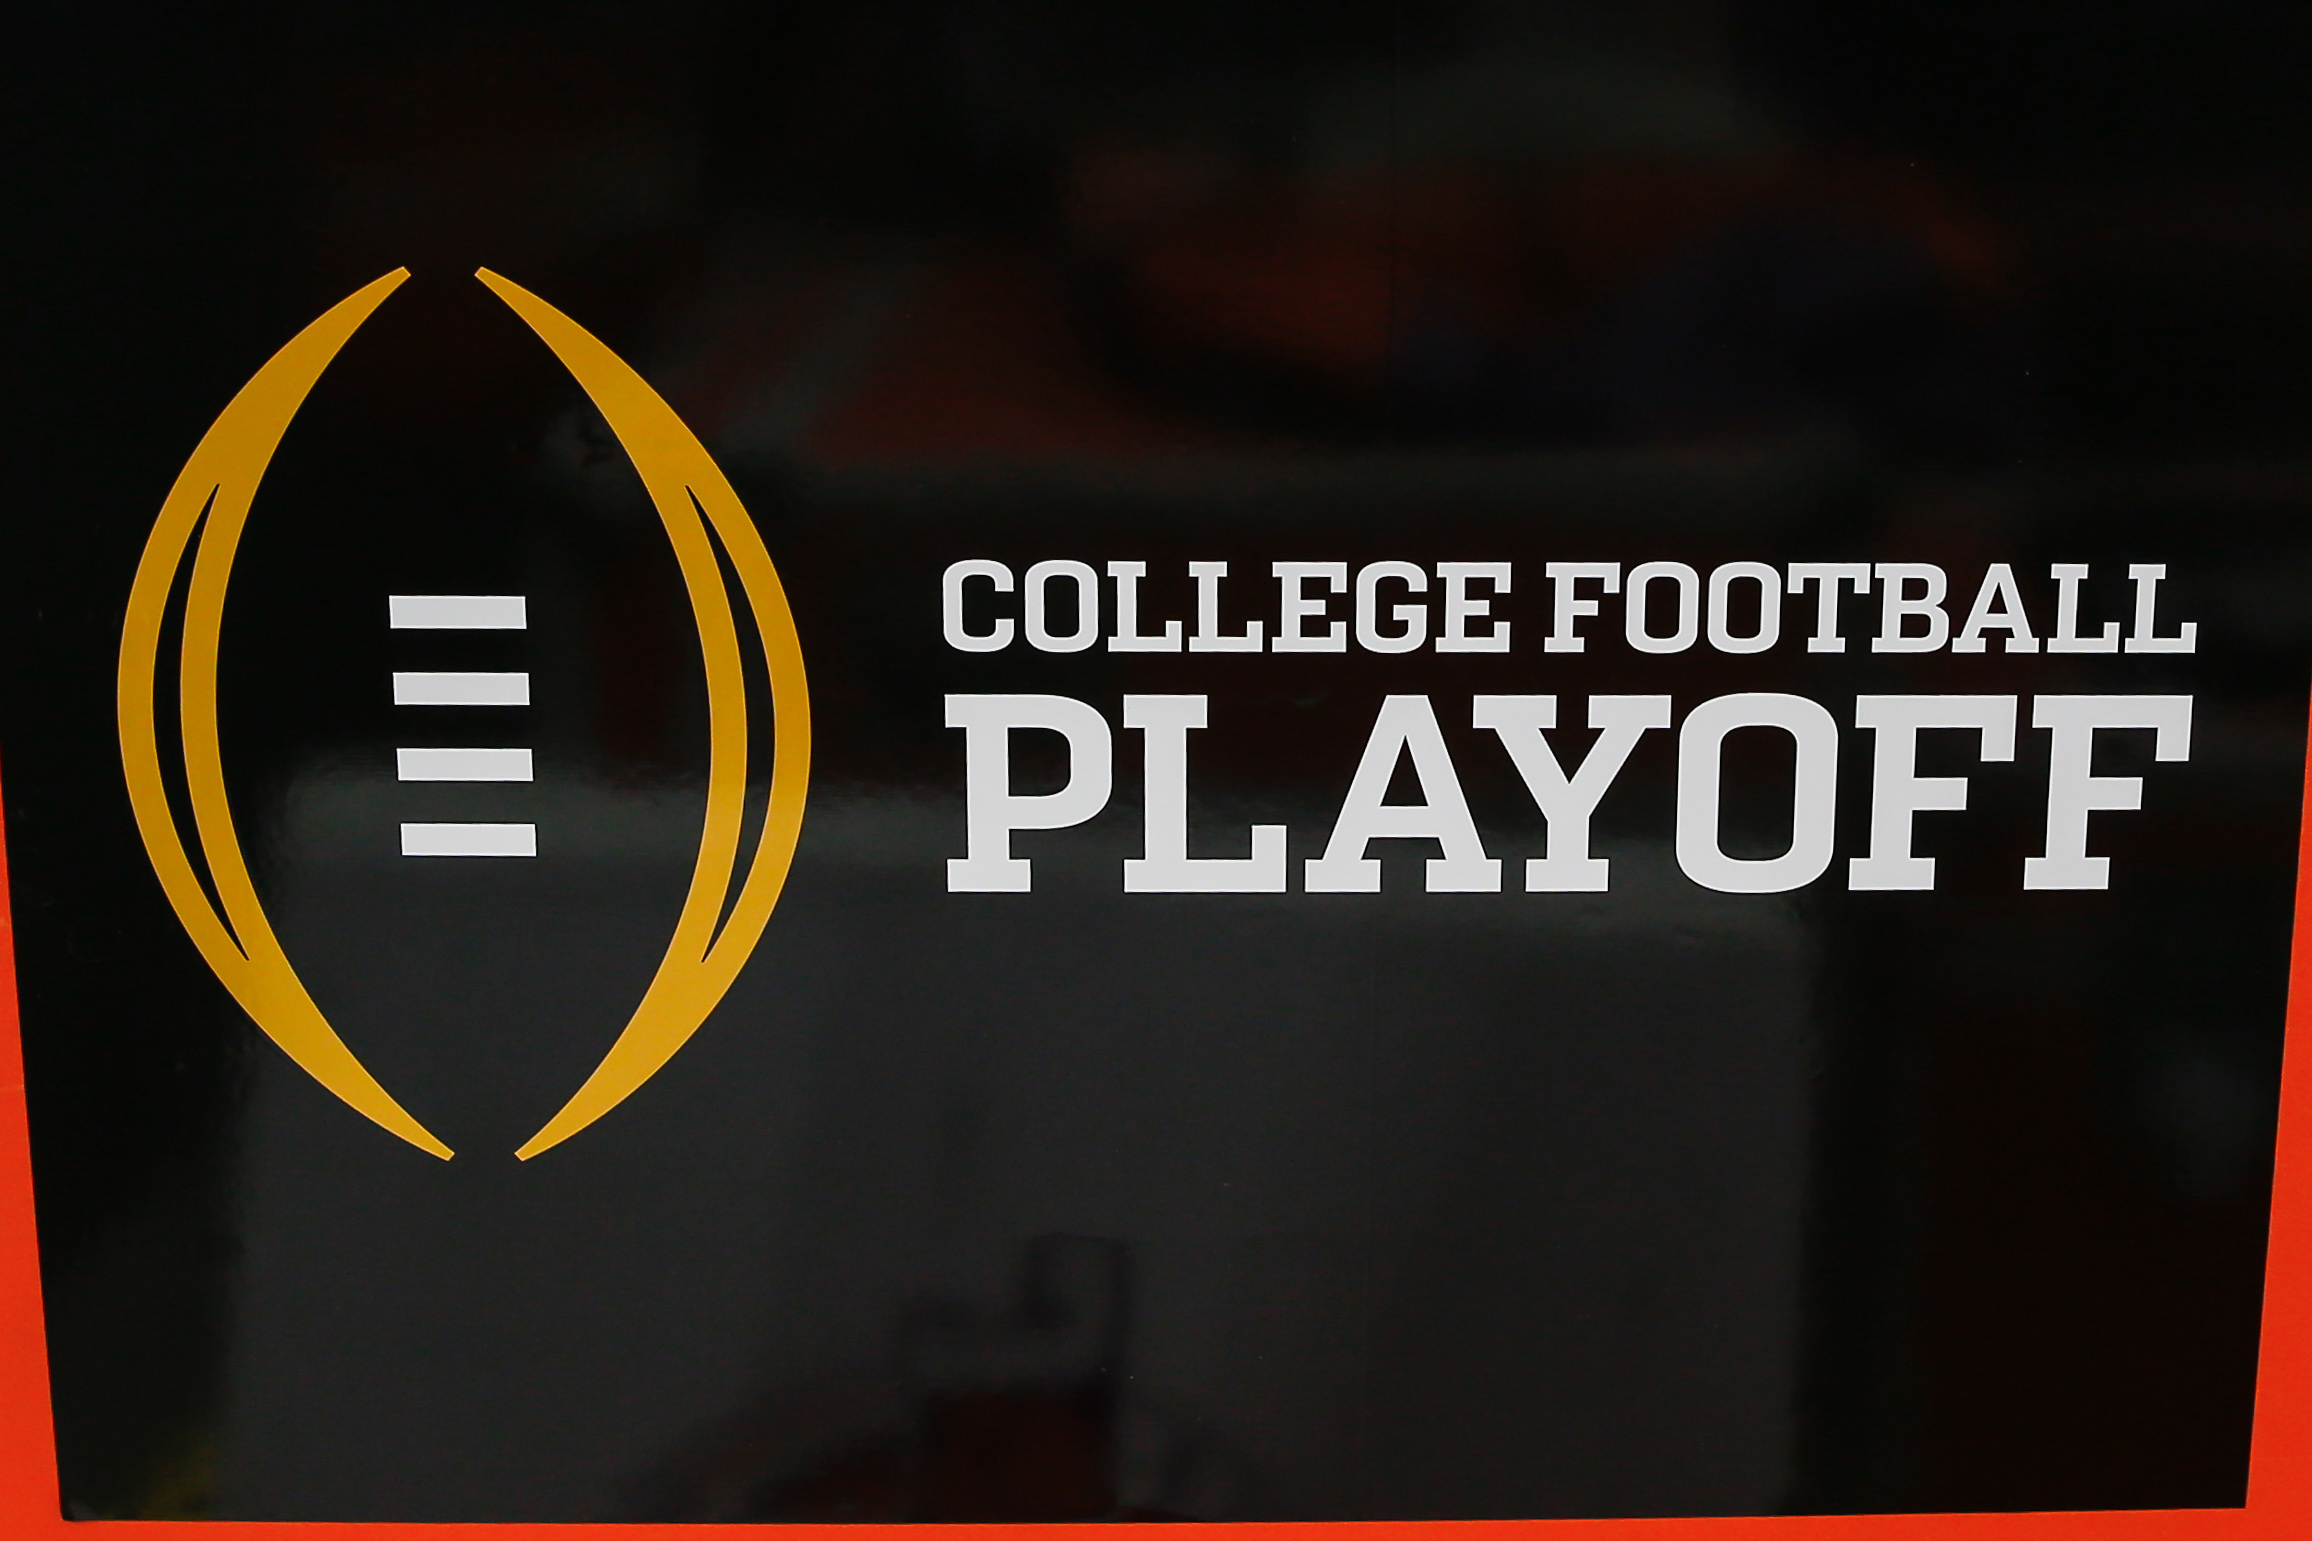 COLLEGE FOOTBALL: DEC 28 CFP Semifinal at the Fiesta Bowl - Clemson v Ohio State